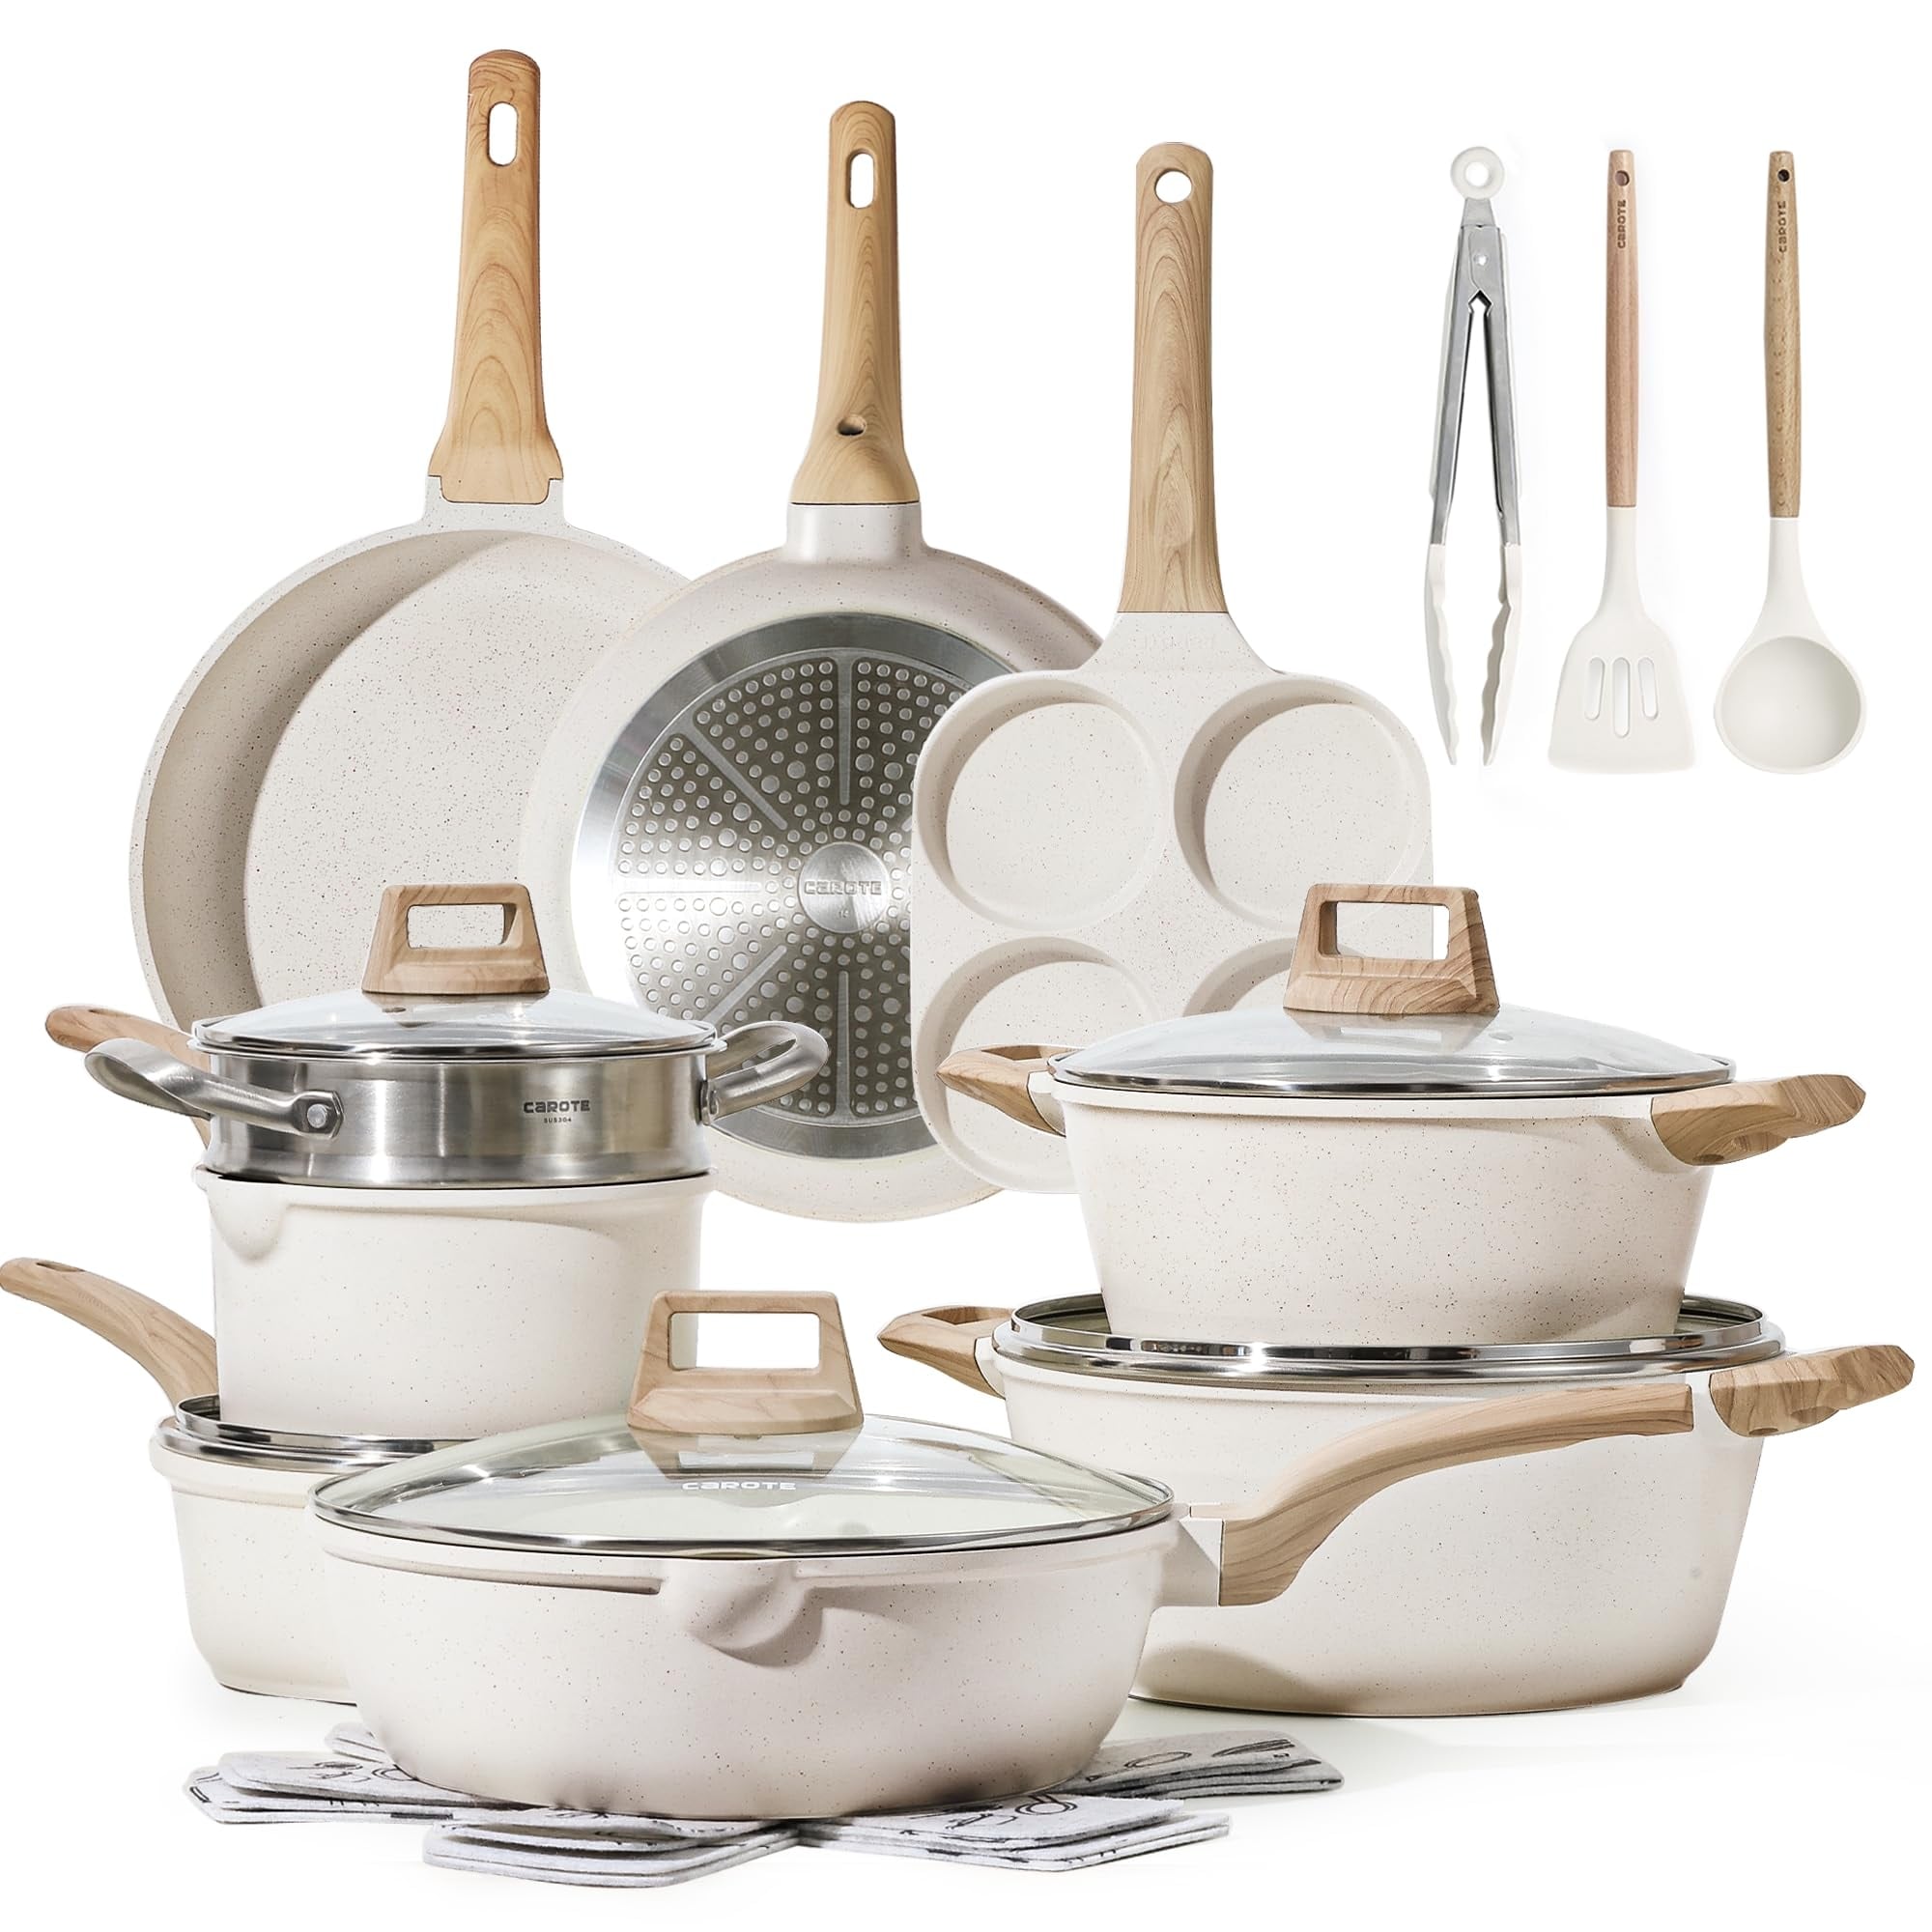 https://ak1.ostkcdn.com/images/products/is/images/direct/af67555b3d186b03485631b31a14eb453b897524/21Pcs-Pots-and-Pans-Set%2C-Nonstick-Cookware-Sets%2C-Granite-Induction-Cookware-Non-Stick-Cooking-Set-w-Frying-Pans-%26-Saucepans.jpg